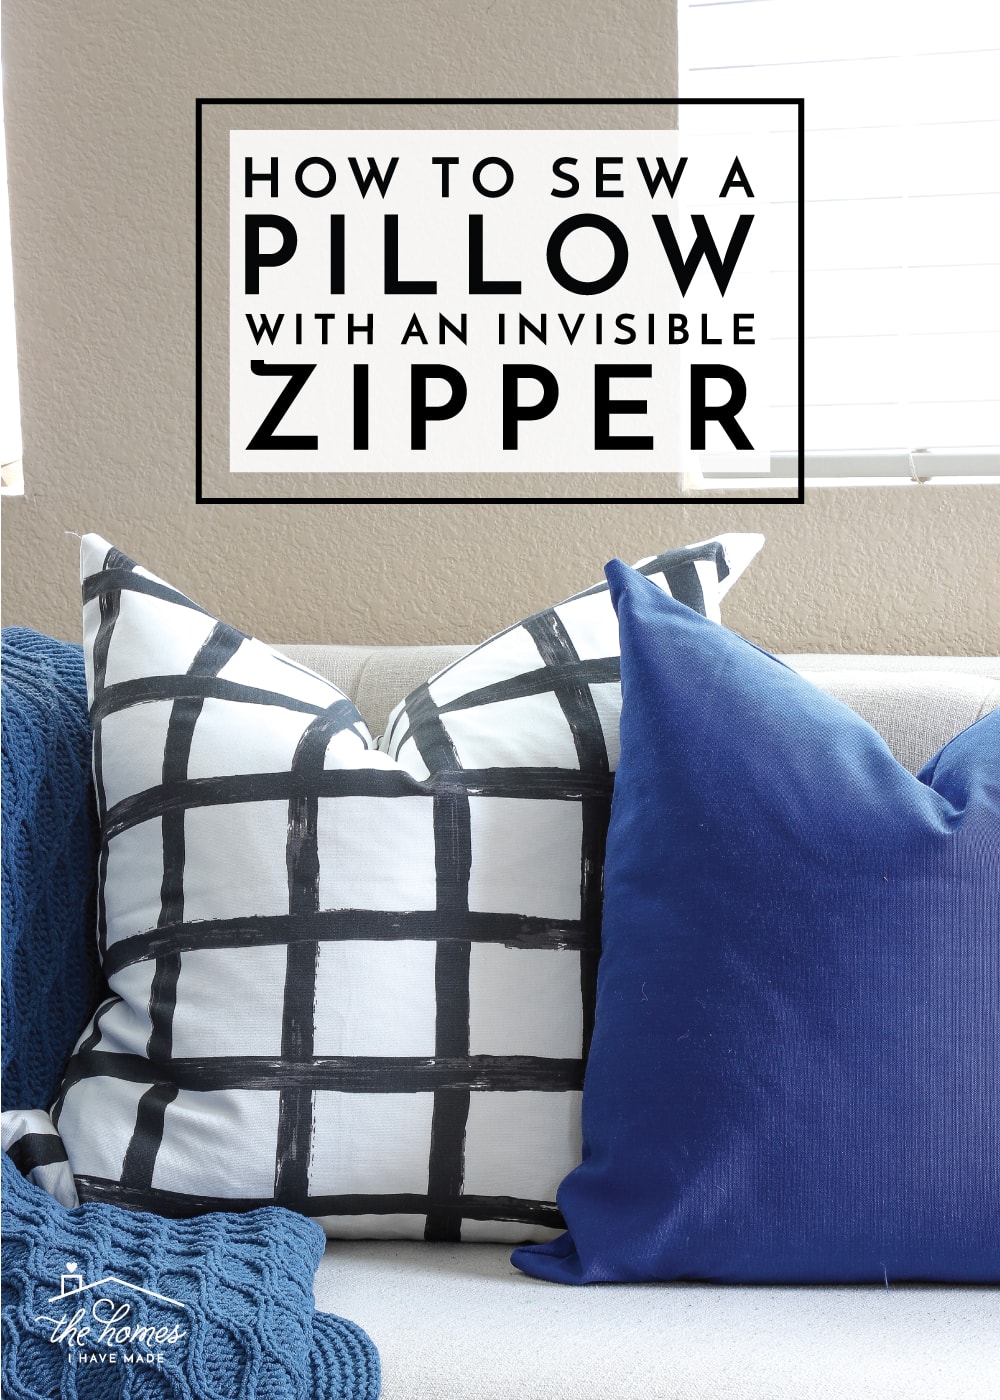 Vertical image of decorative pillows in black, white, and blue with text overlay